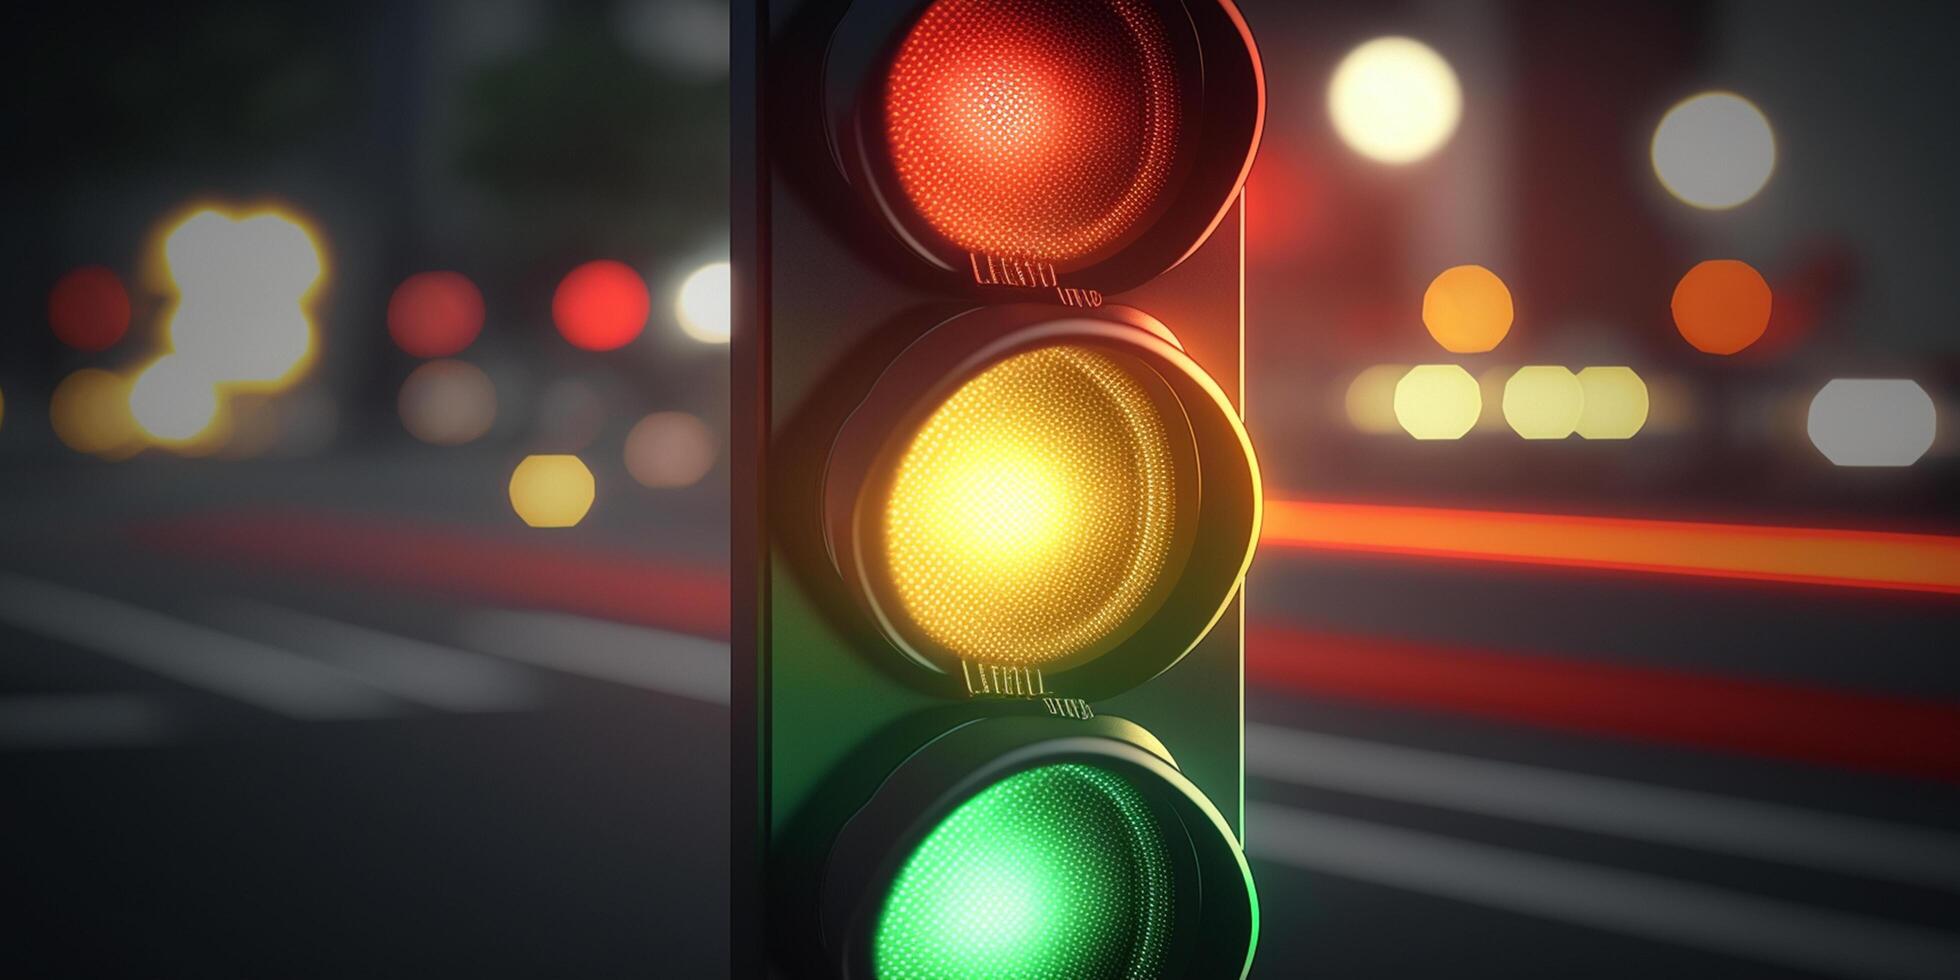 Dynamic Traffic Light with Blurred Urban Landscape Background photo